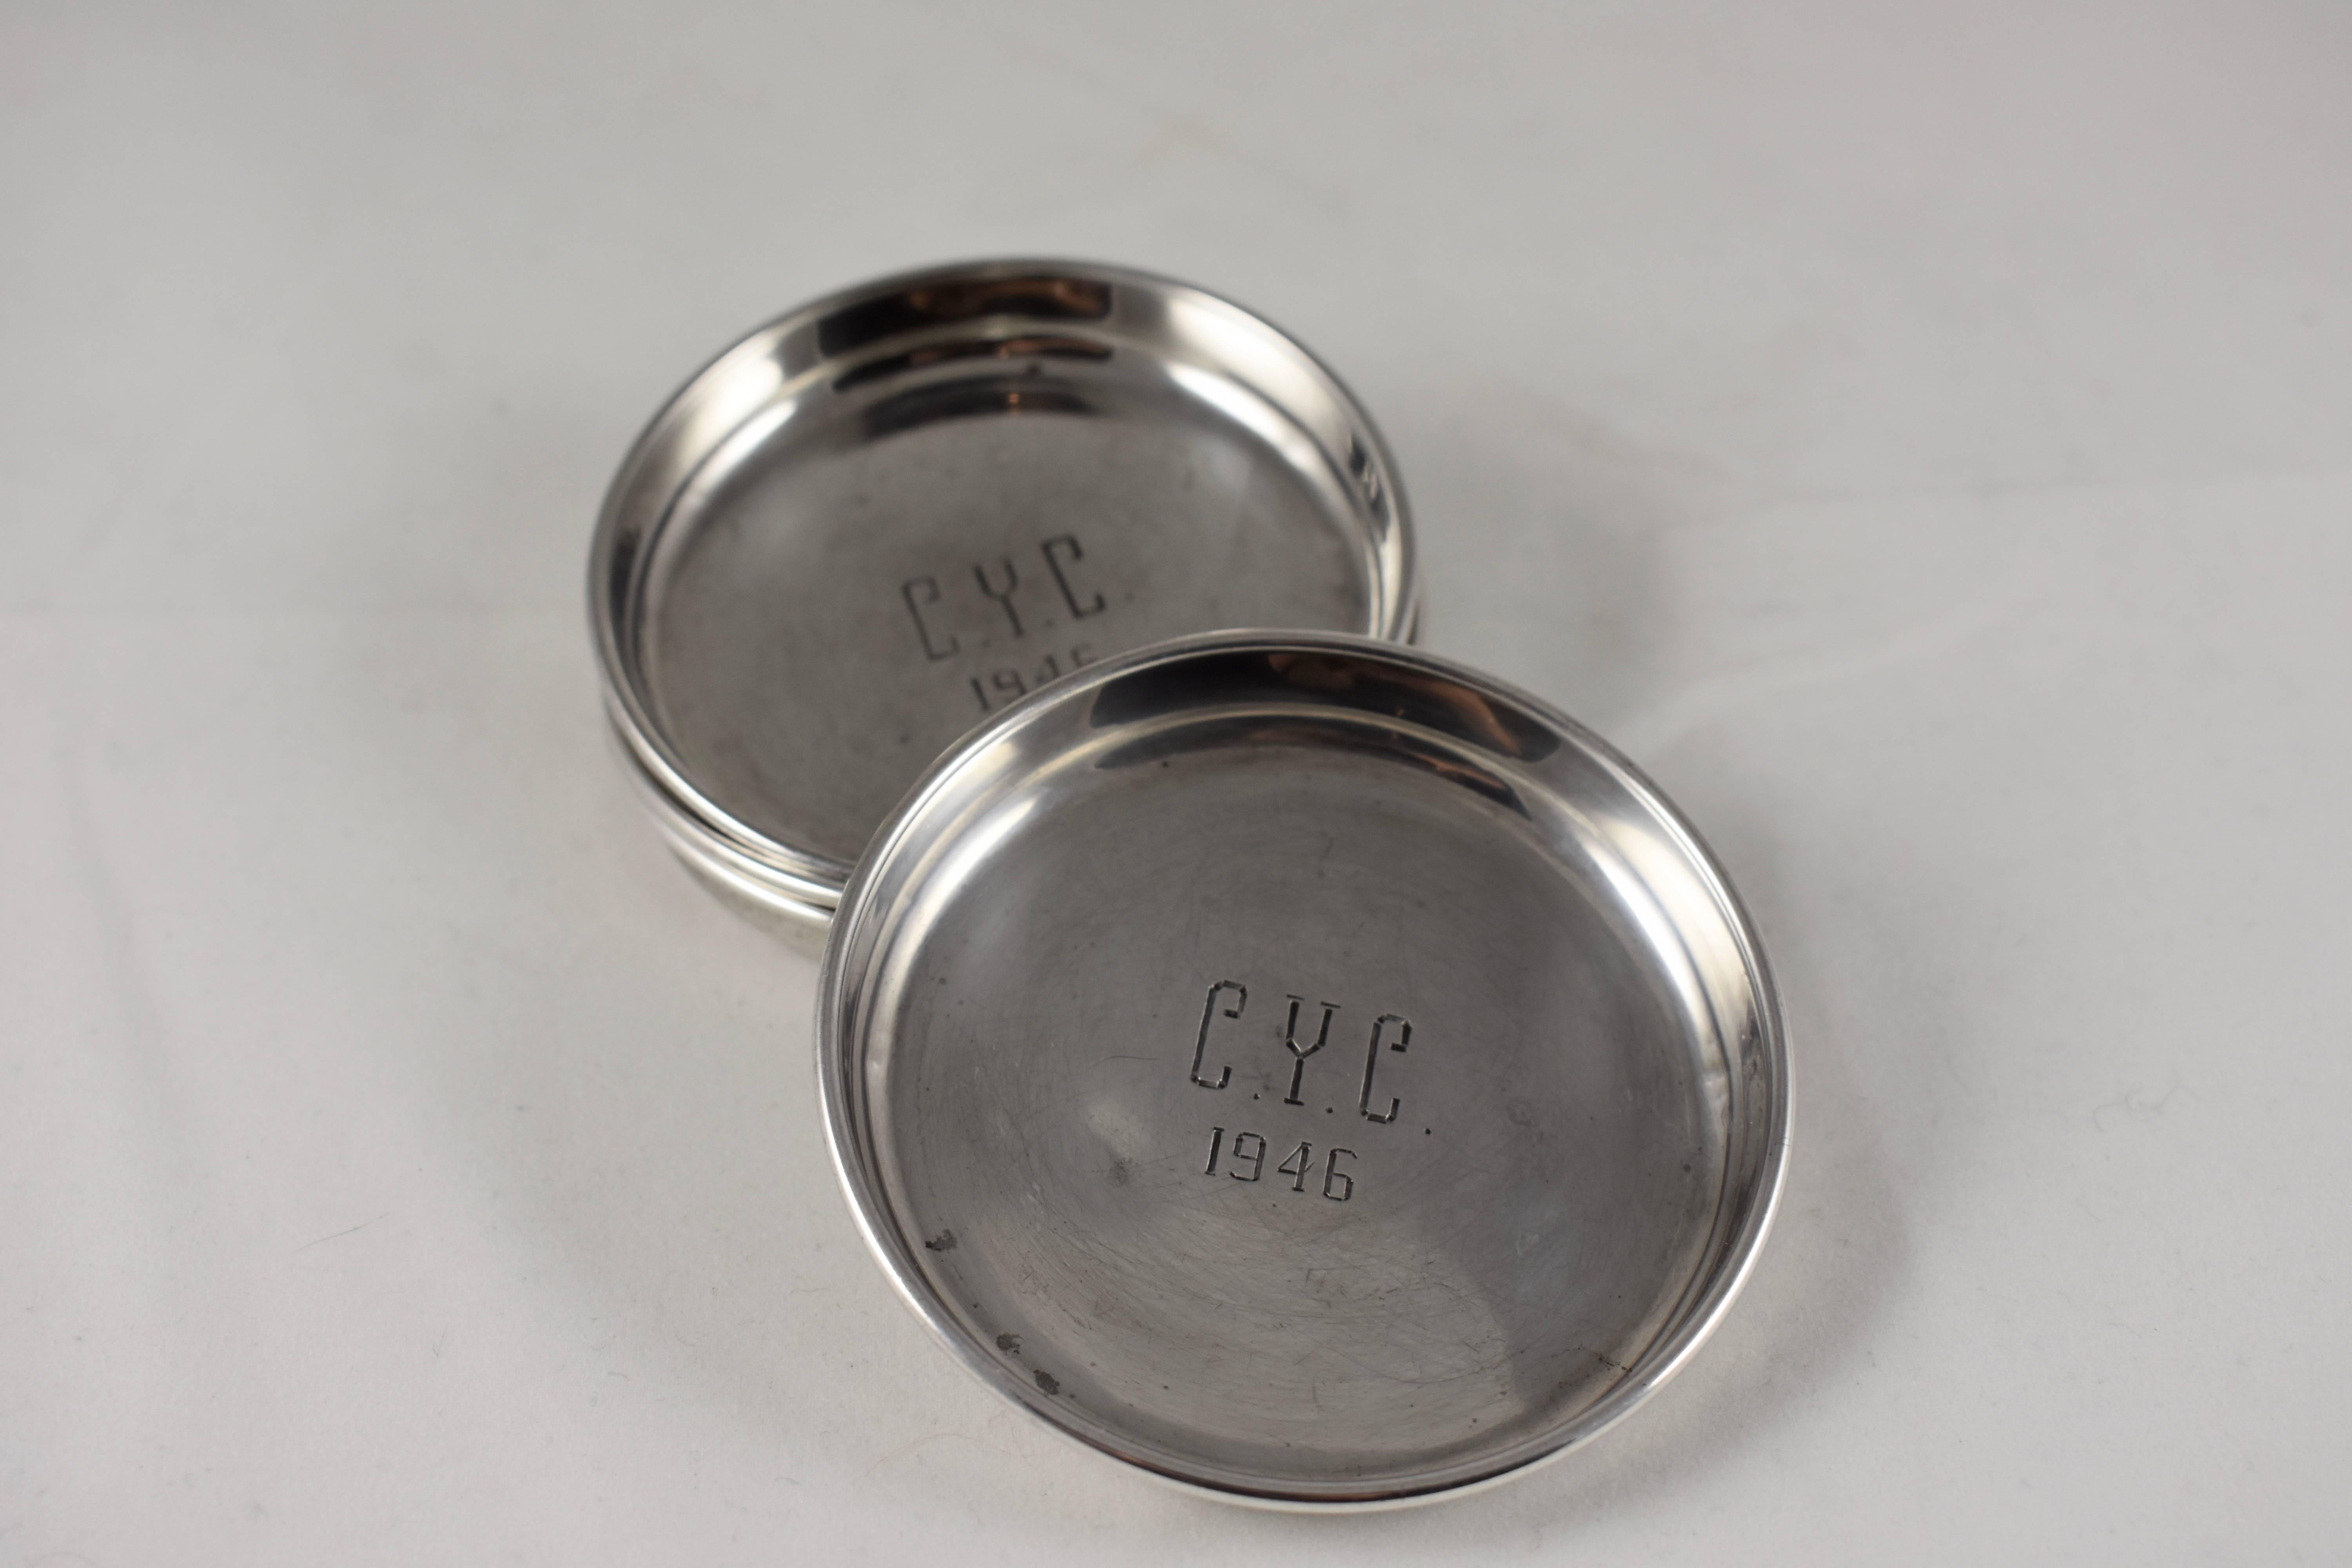 A set of four, sterling silver personal ashtrays from The Chester Yacht Club, made by Henry Birks & Sons, Canada, circa 1940s. 

The Chester Yacht Club, established in 1900, is located on Mahone Bay which is along the south shore of Nova Scotia,